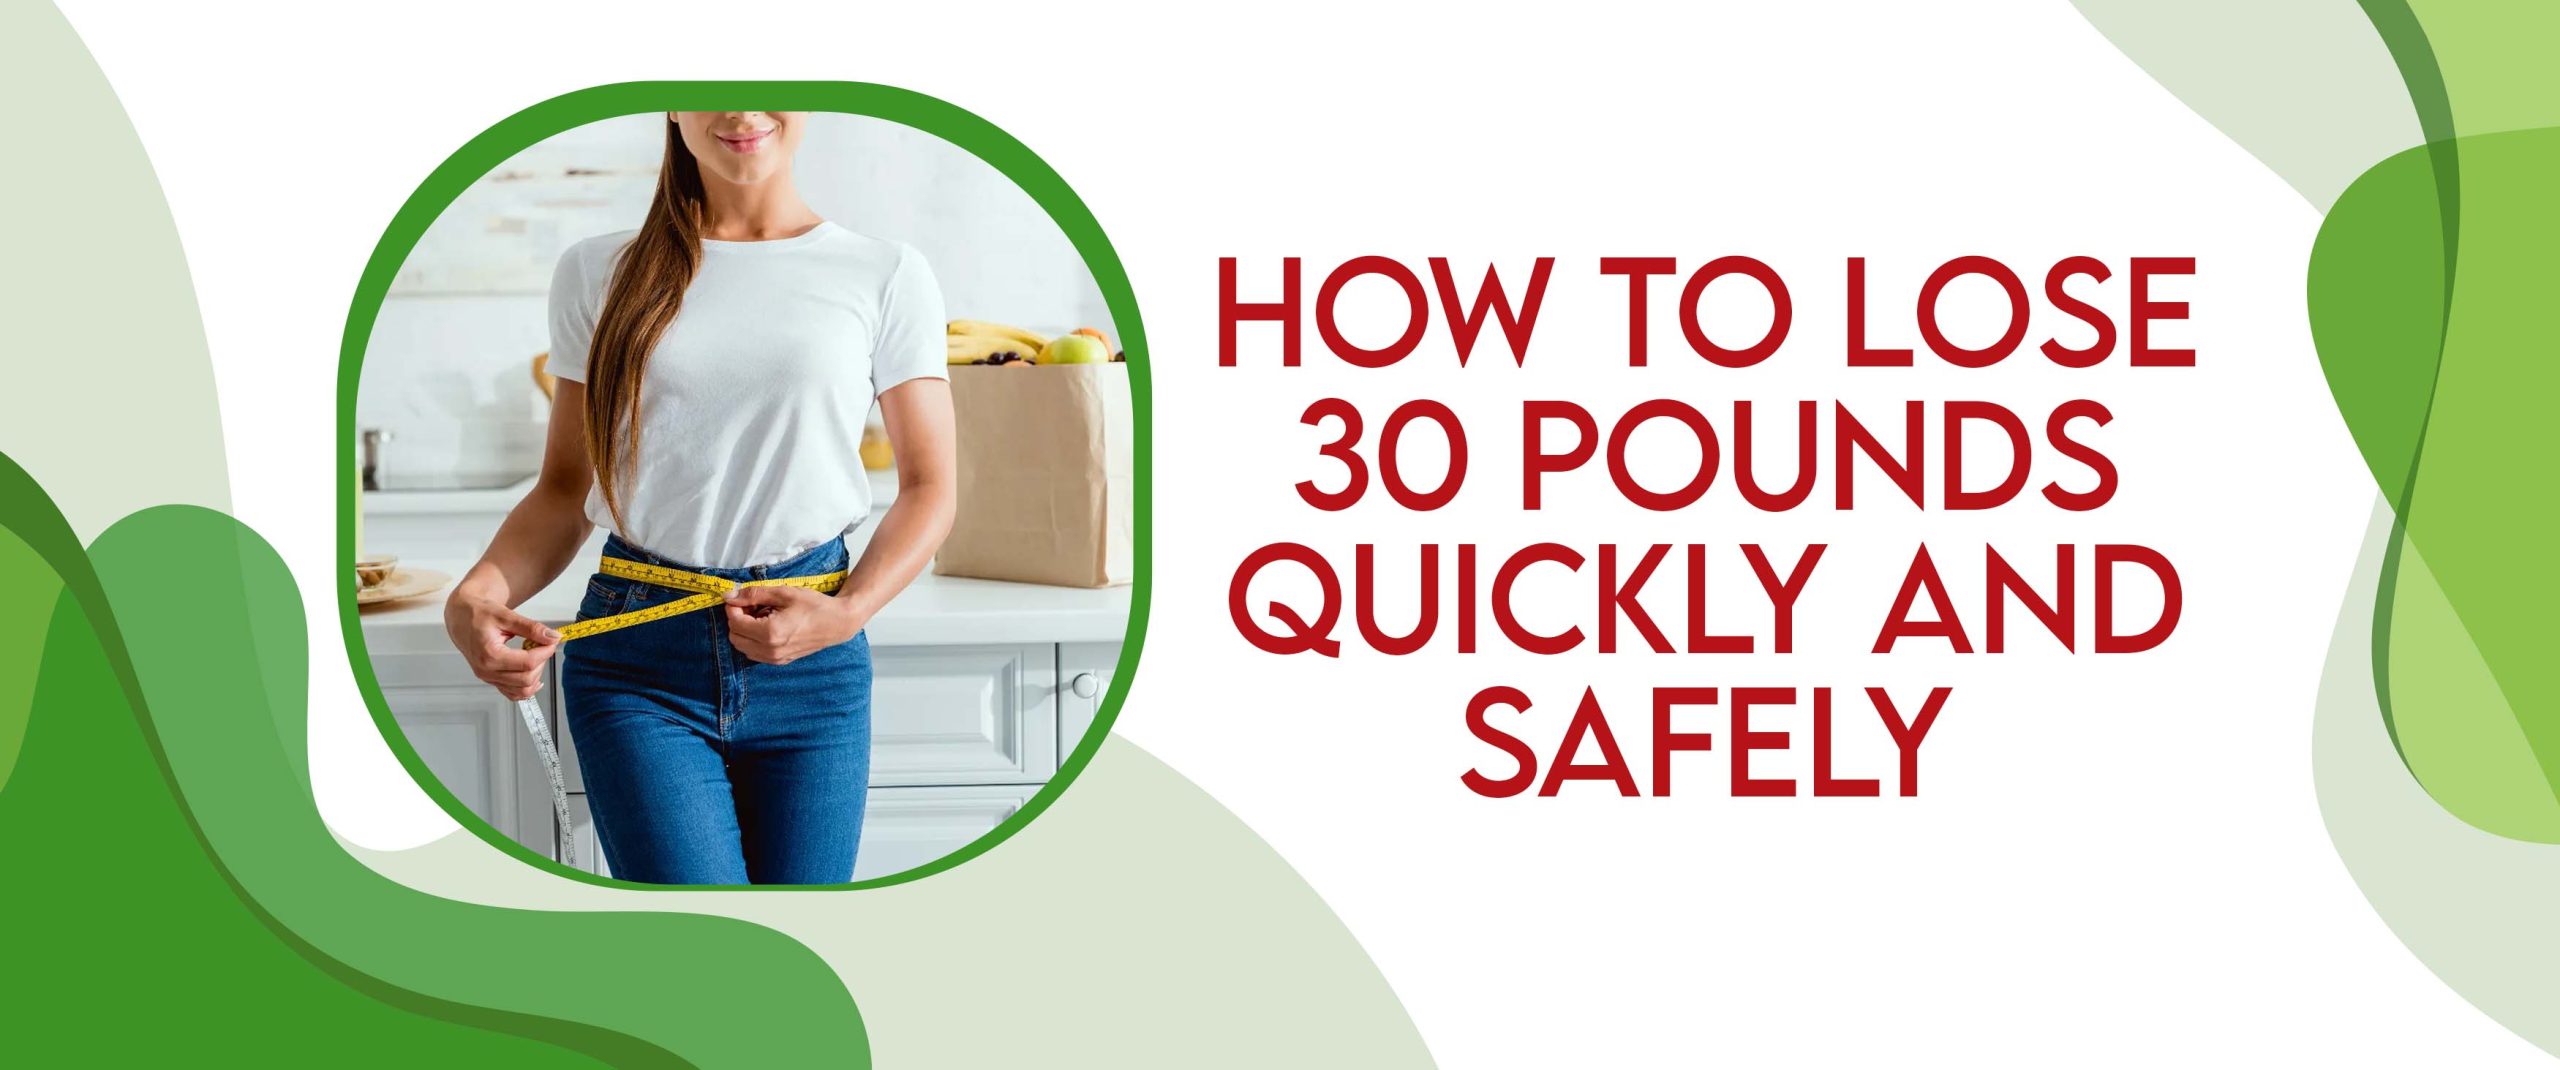 How To Lose 30 Pounds Quickly And Safely